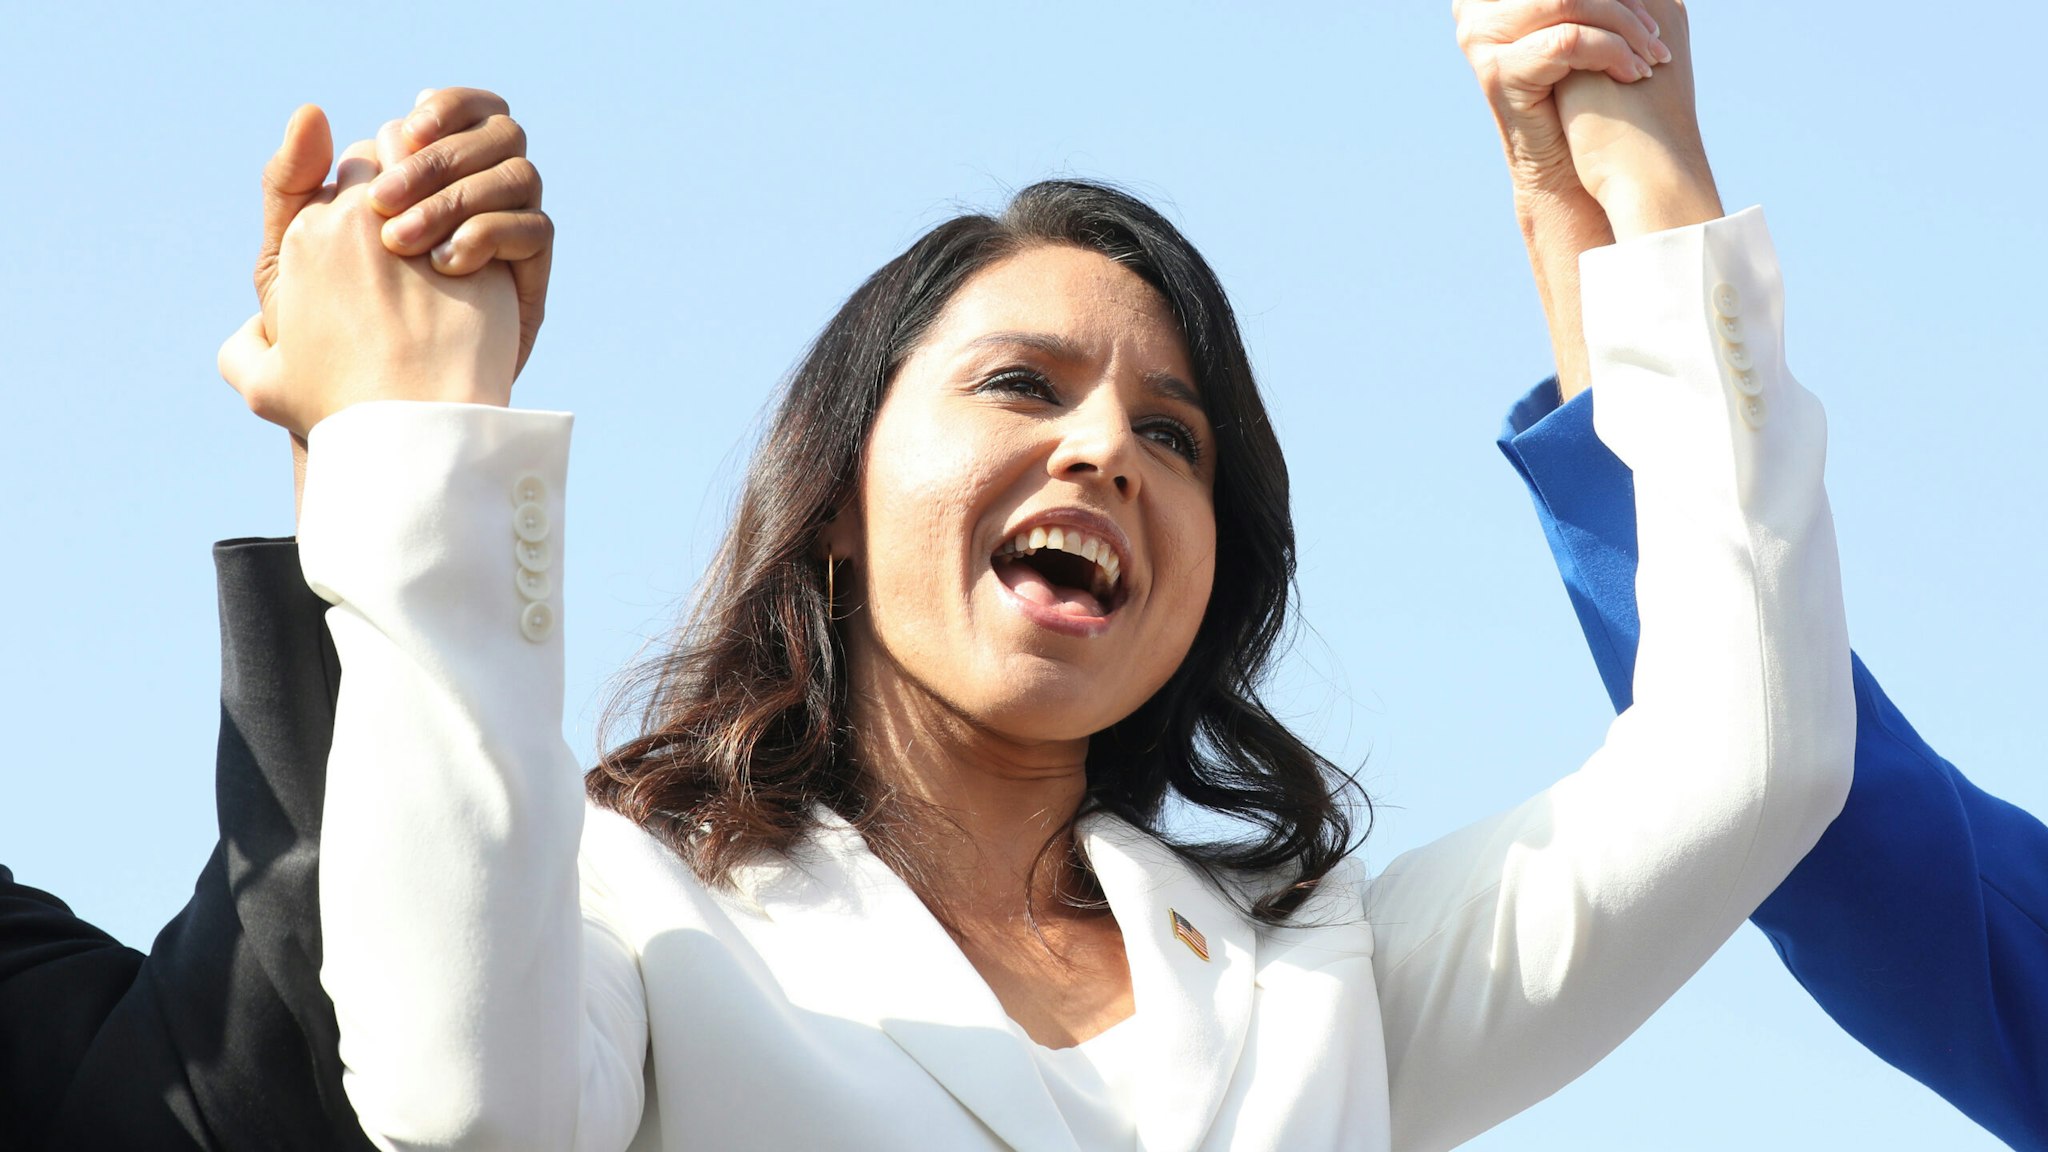 LOS ANGELES, CALIFORNIA - NOVEMBER 11: Democratic presidential candidate U.S. Rep. Tulsi Gabbard (D-HI) sings during the inaugural Veterans Day L.A. event held outside of the Los Angeles Memorial Coliseum on November 11, 2019 in Los Angeles, California. The stadium's historic torch was lit at the ceremony to mark the anniversary of the armistice which ended World War I in 1918. Gabbard is the first female combat veteran to run for the U.S. presidency.